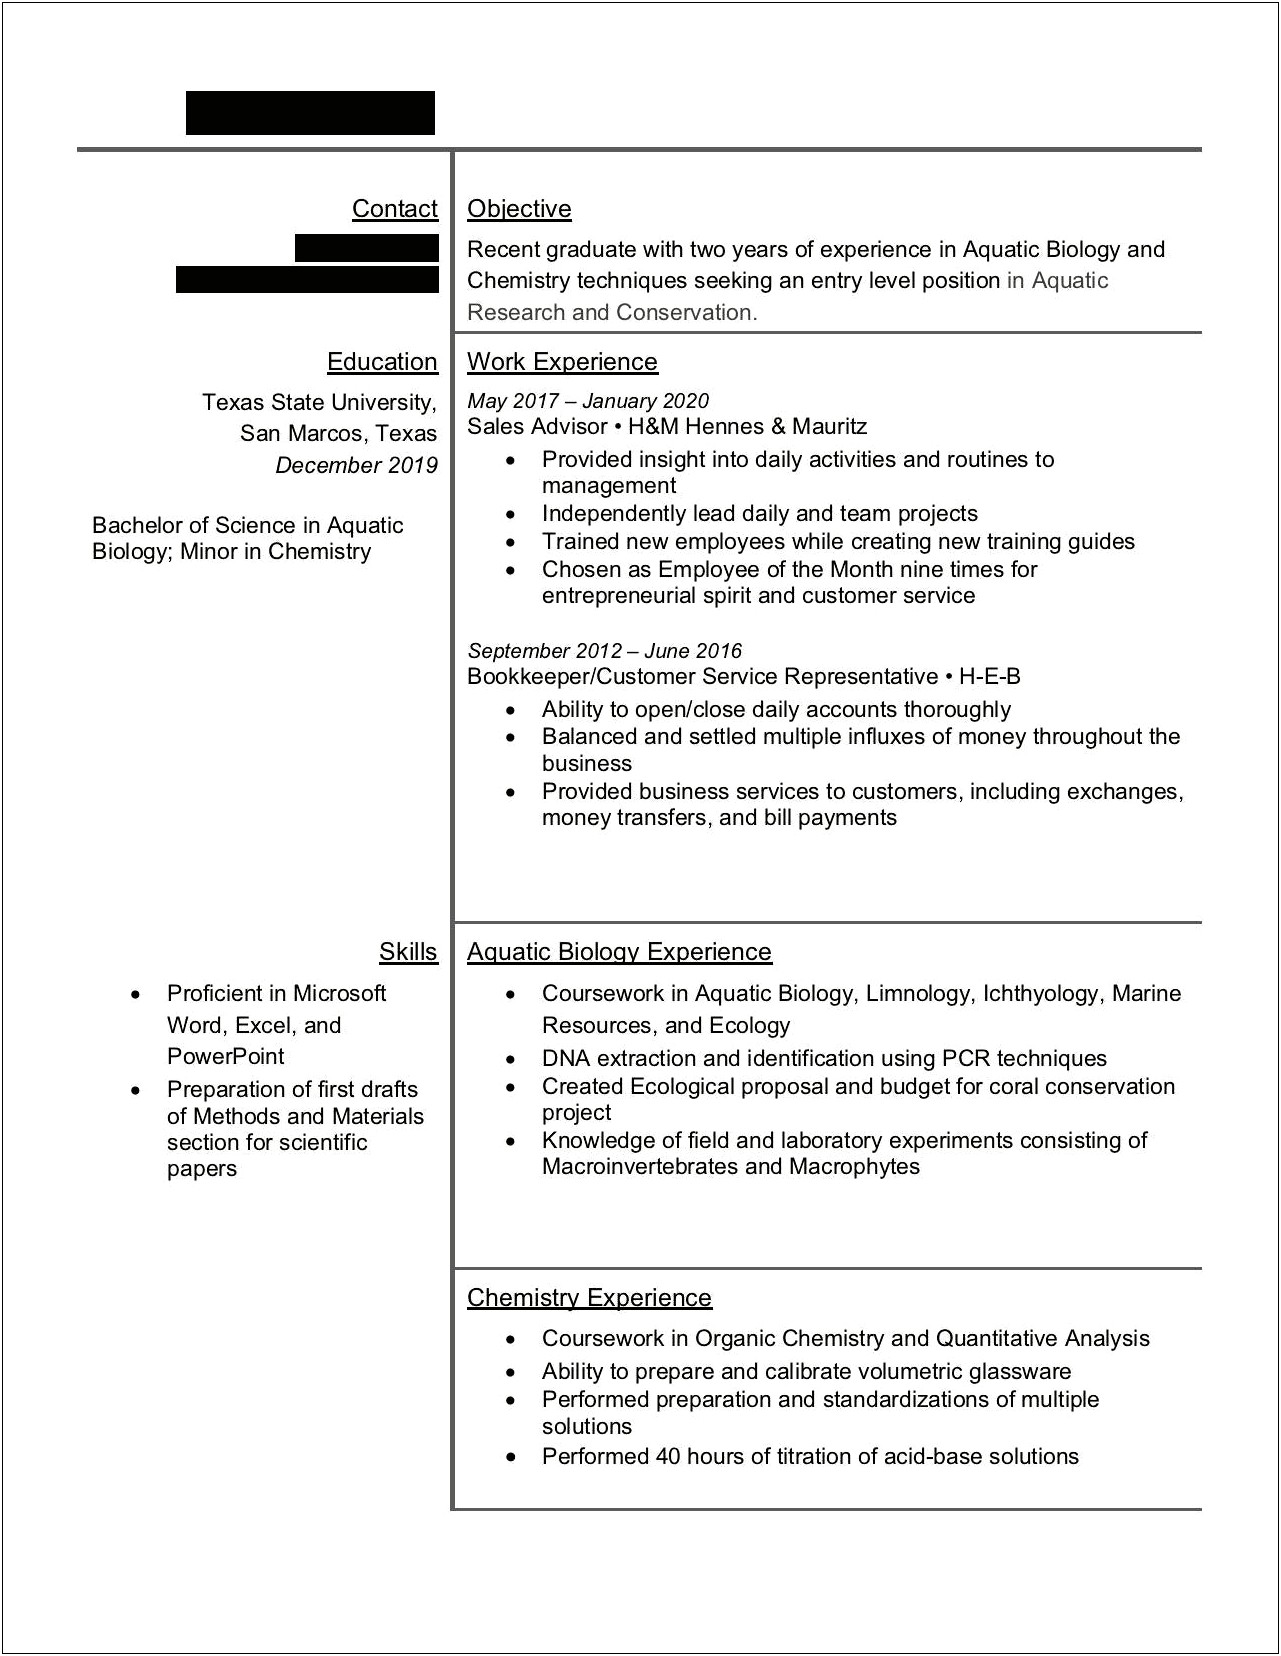 Put Server Experience In Resume For Biology Job